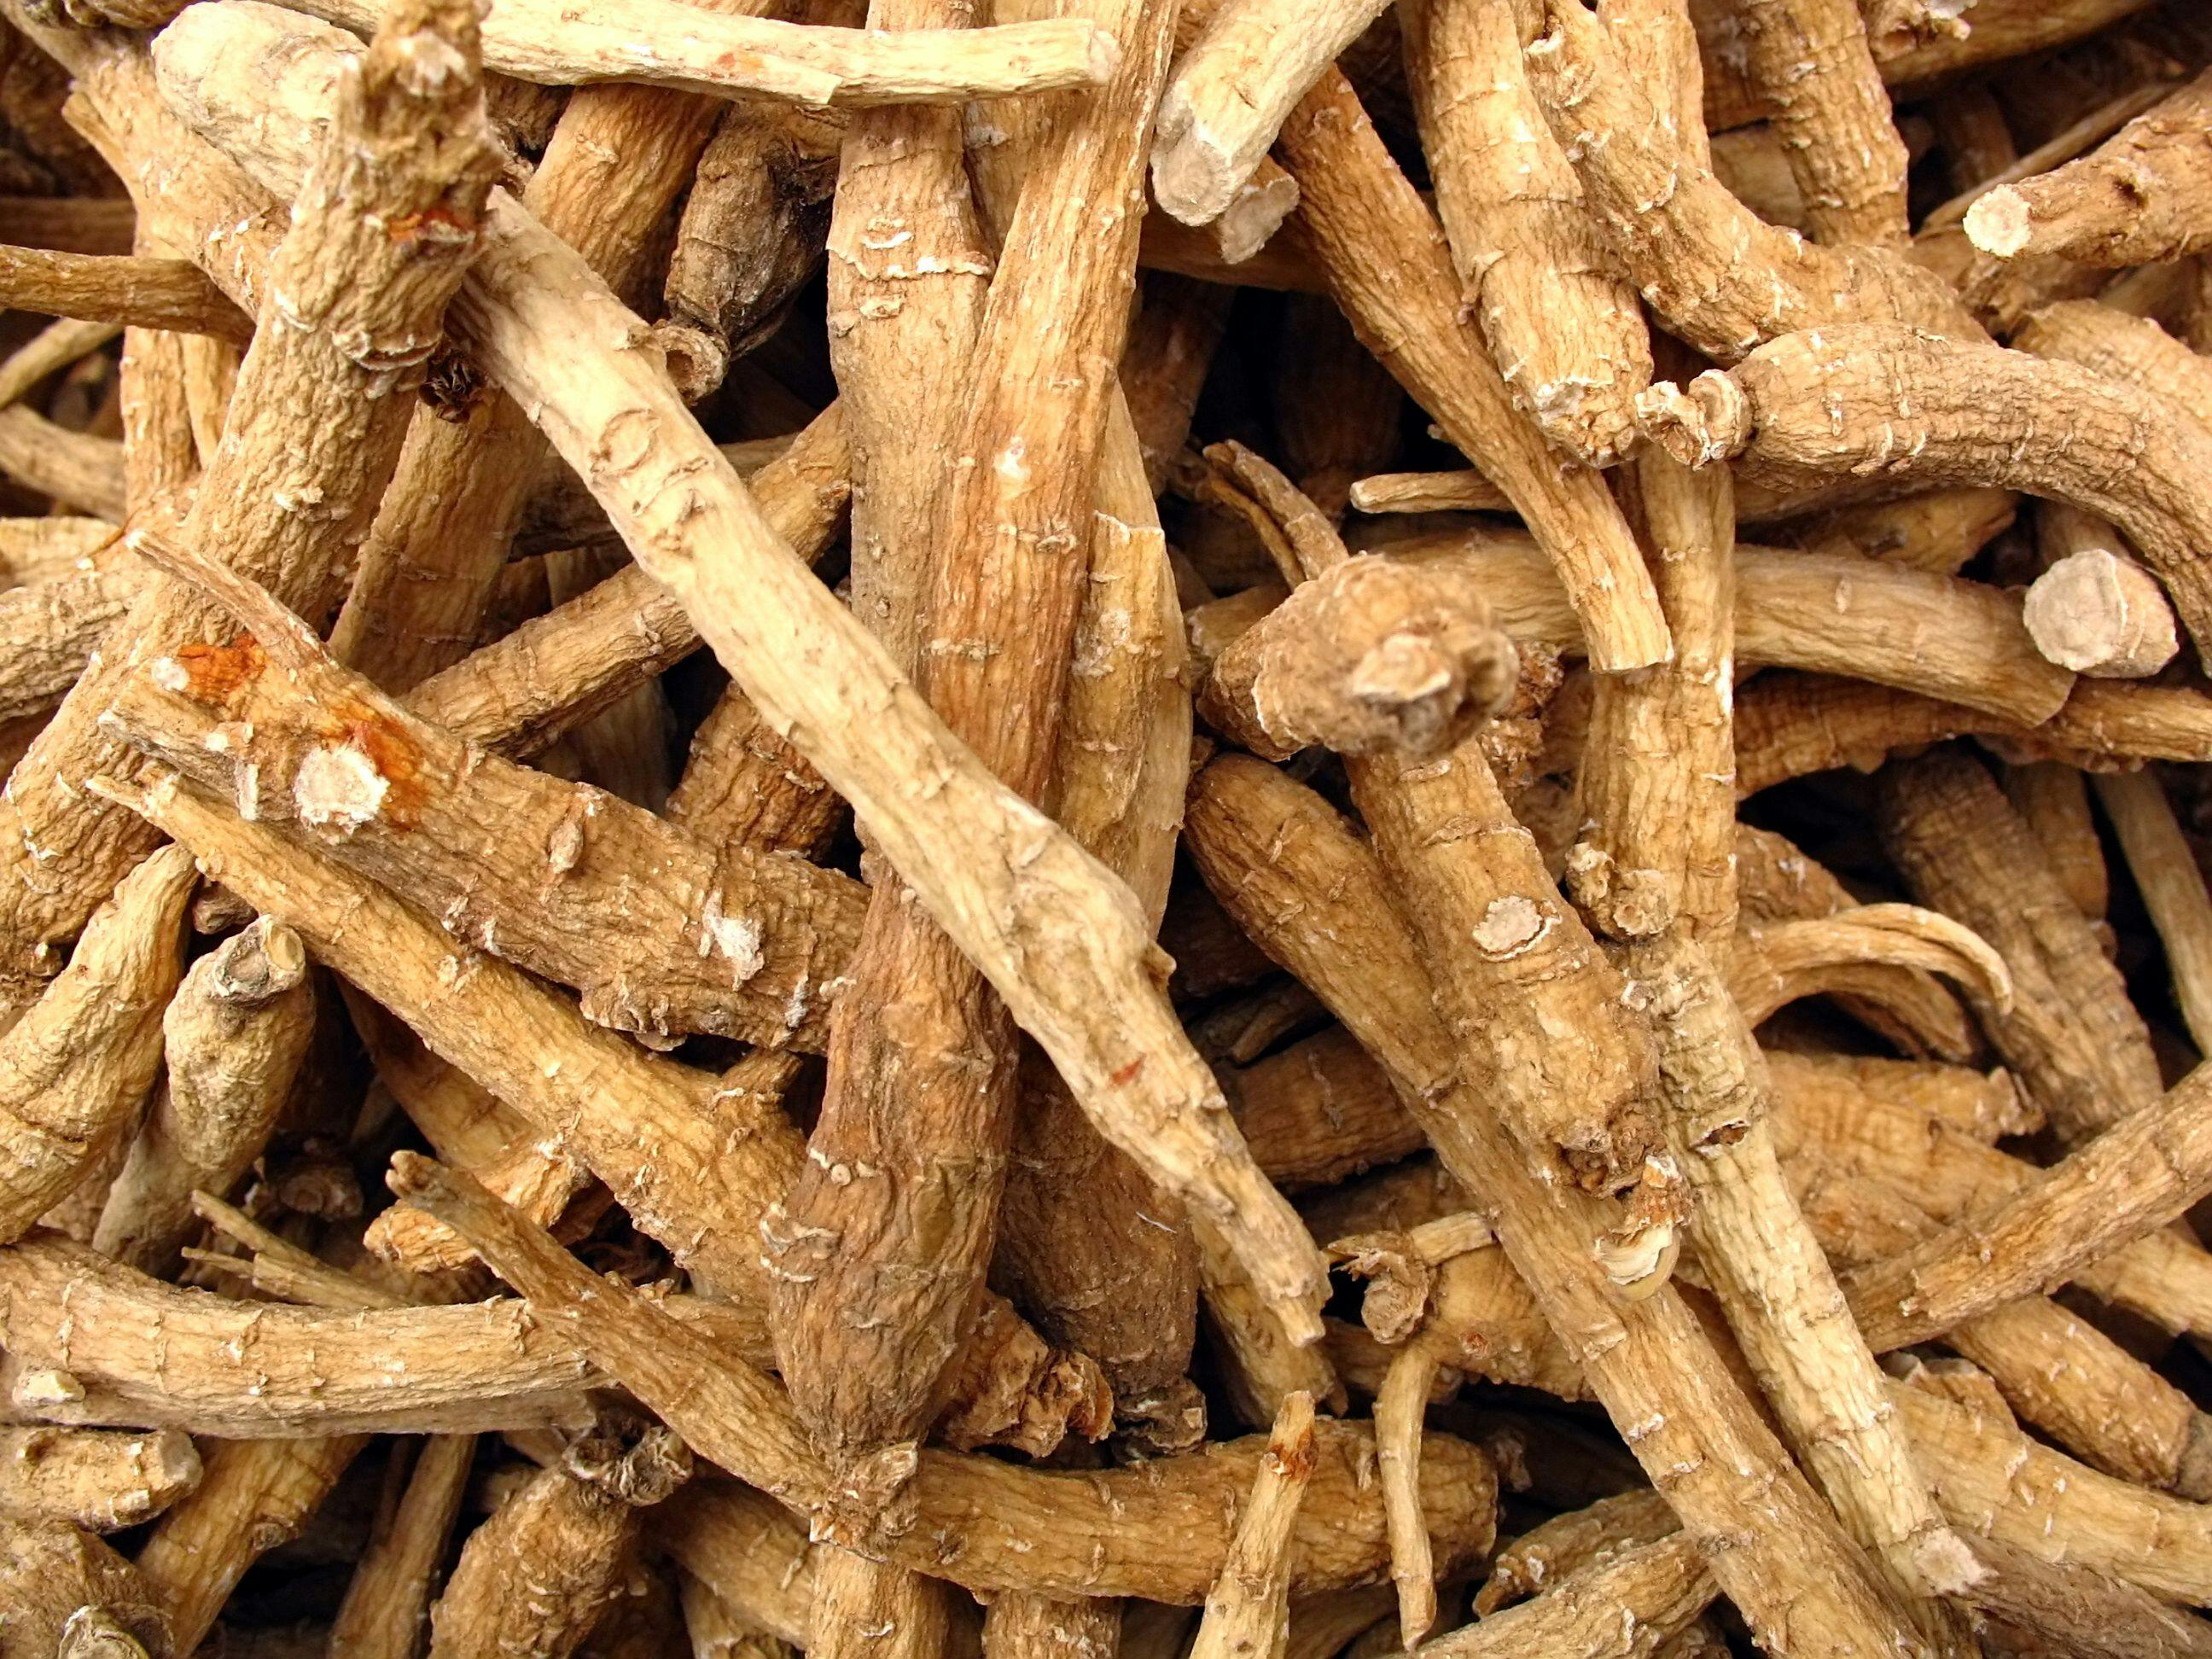 ginseng roots from chinese herbal pharmacy | Image Credit: © nettestock - stock.adobe.com